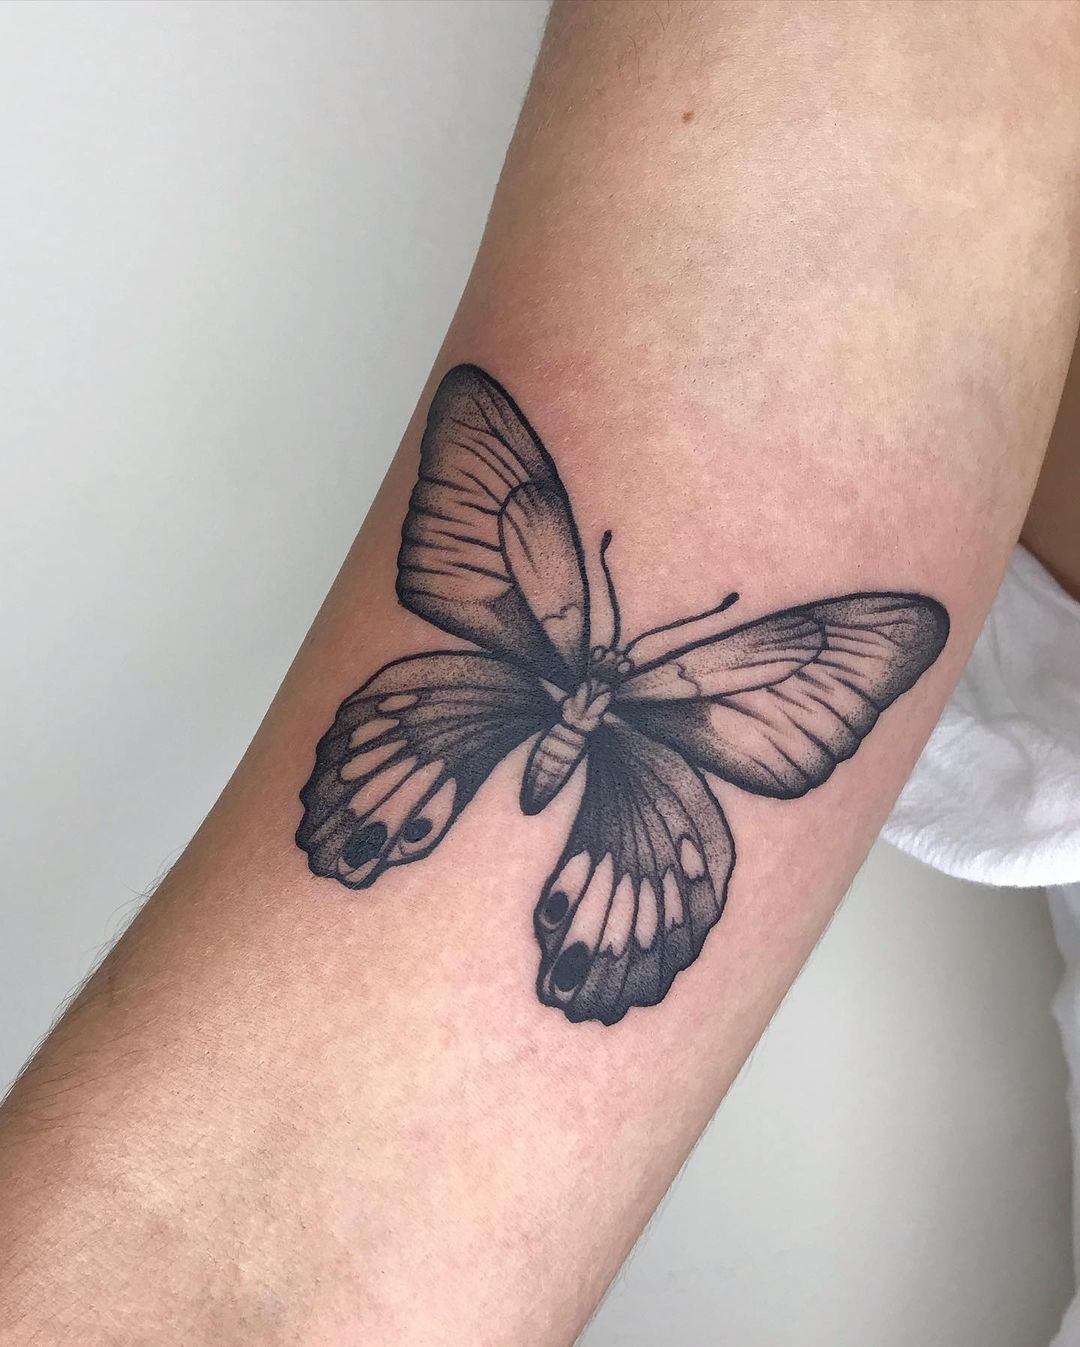 30+ Best Butterfly Tattoos Design You’ll Love To Get Next. Butterfly Tattoo on Arm